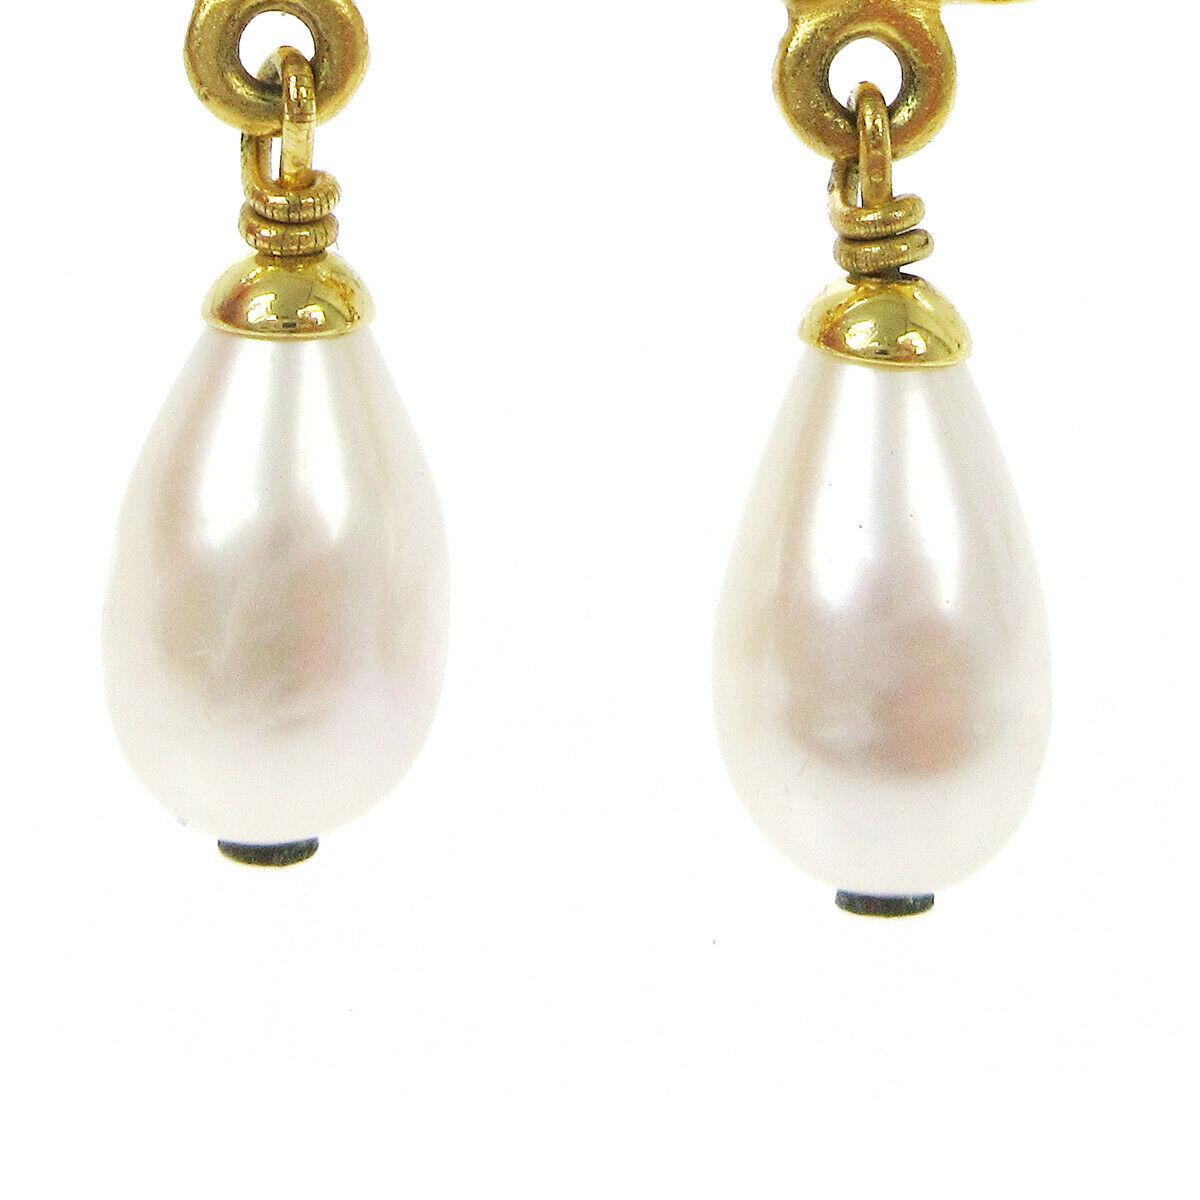 Chanel Gold Charm CC Faux Pearl Dangle Drop Evening Earrings
Metal

Gold tone
Faux pearl
Clip on closure
Made in France
Width 0.50